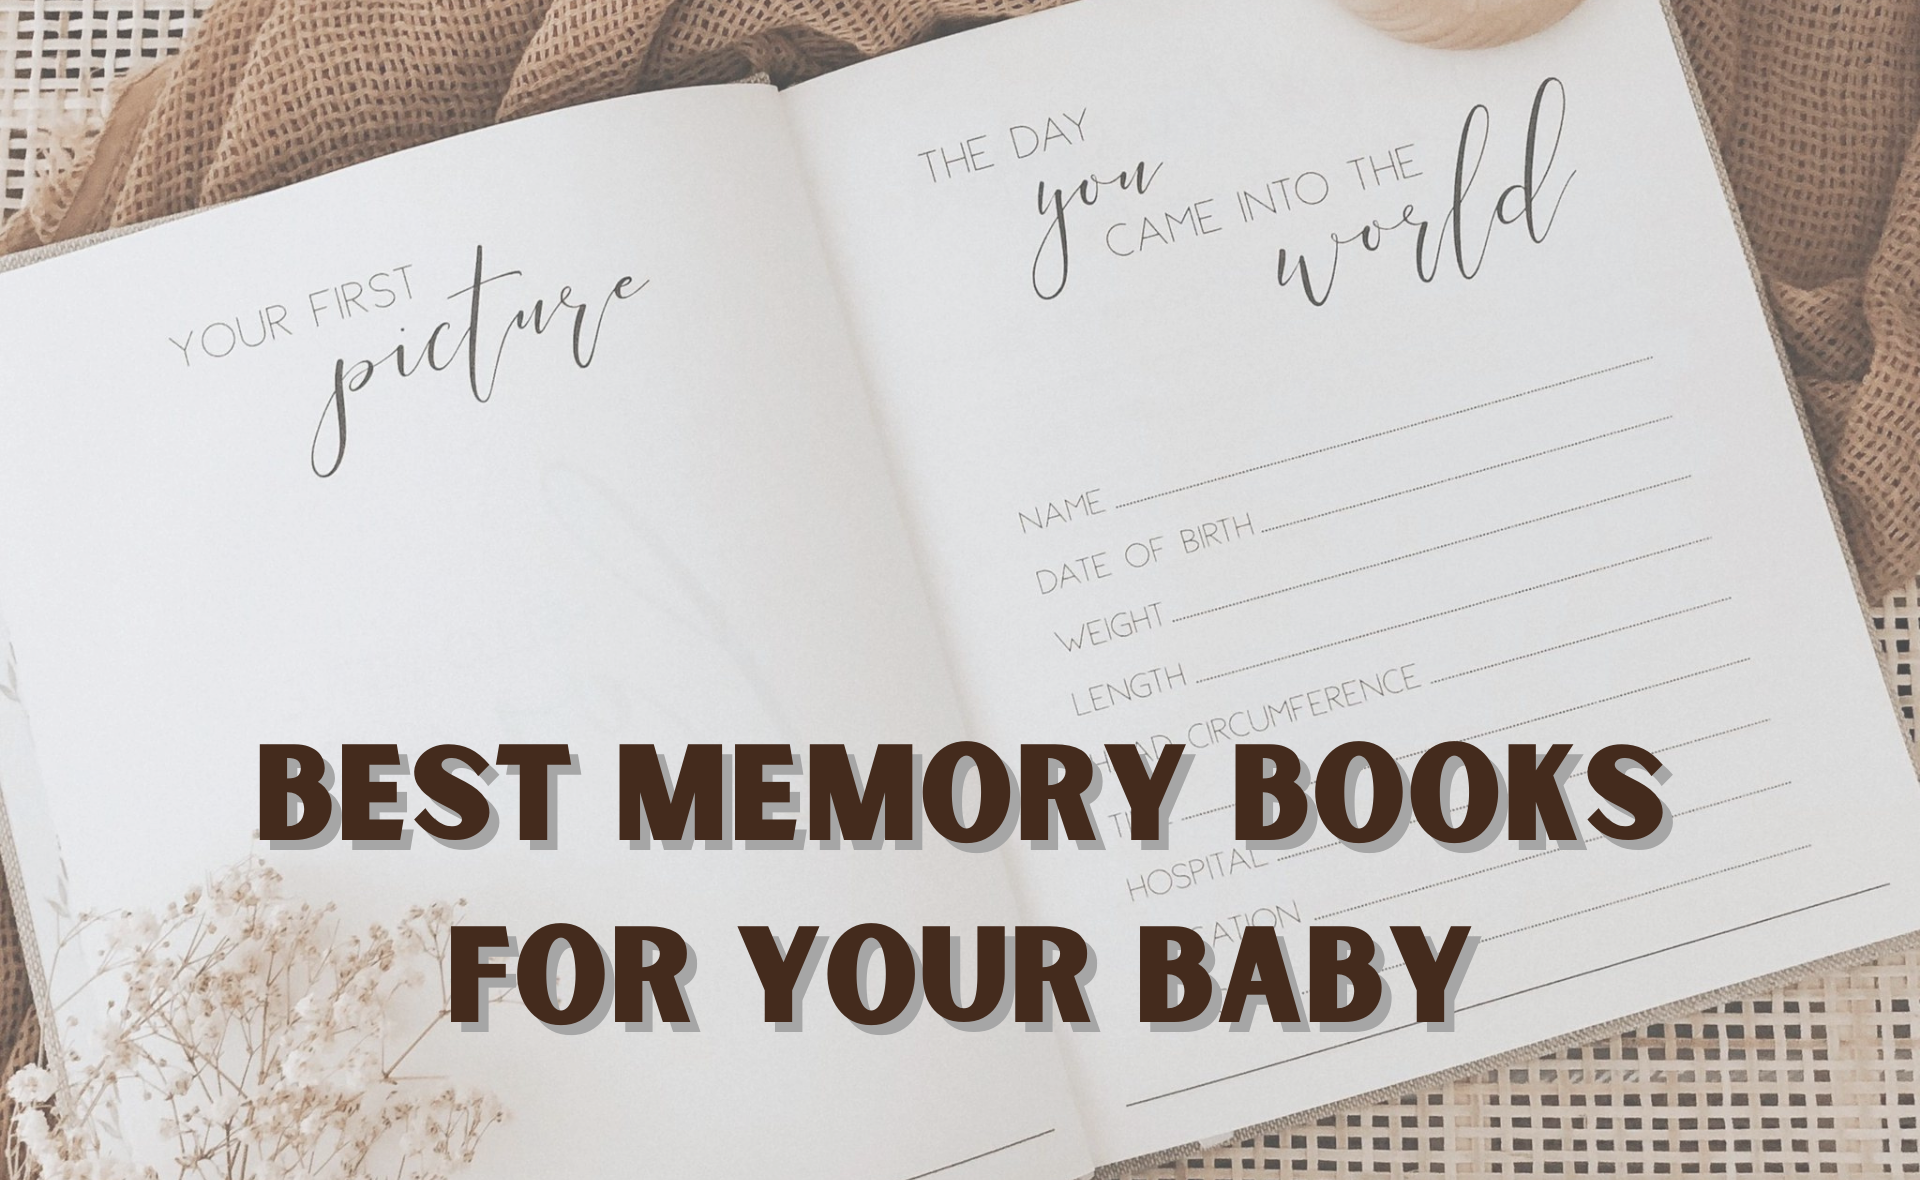 BEST KEEPSAKE BOOKS FOR YOUR BABY